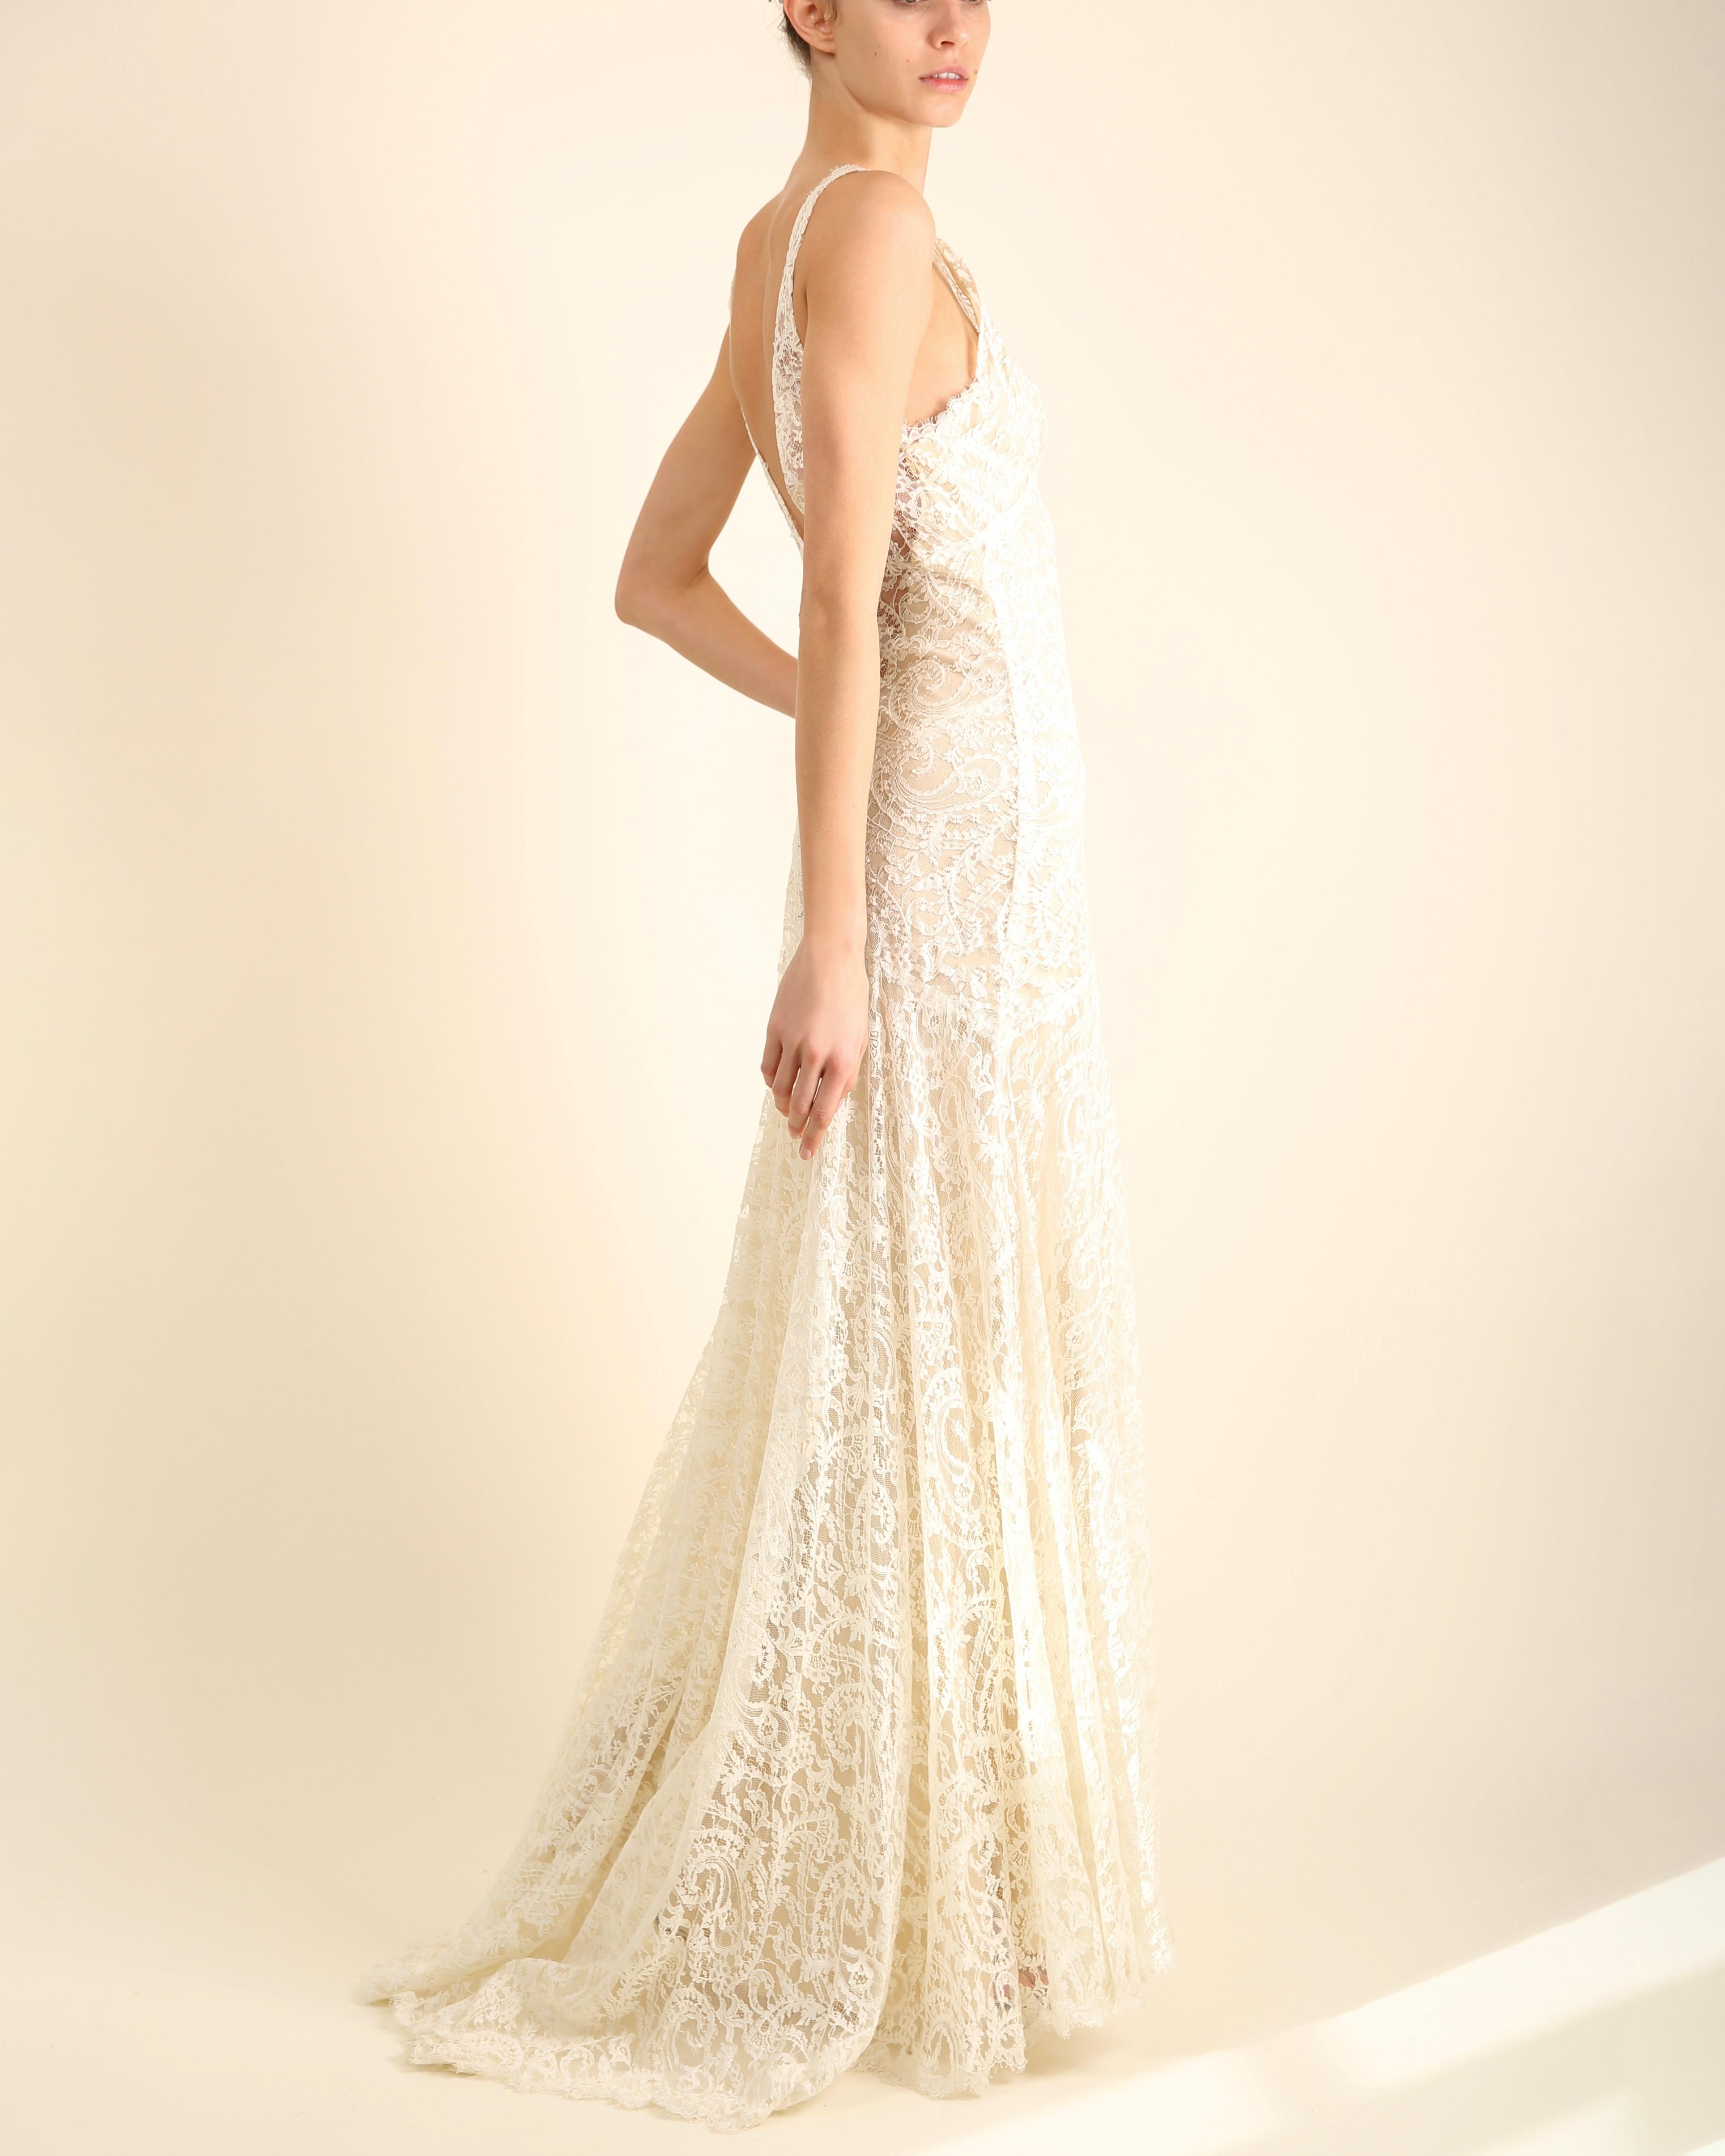 Monique Lhuillier ivory lace plunging backless wedding gown with train dress  3